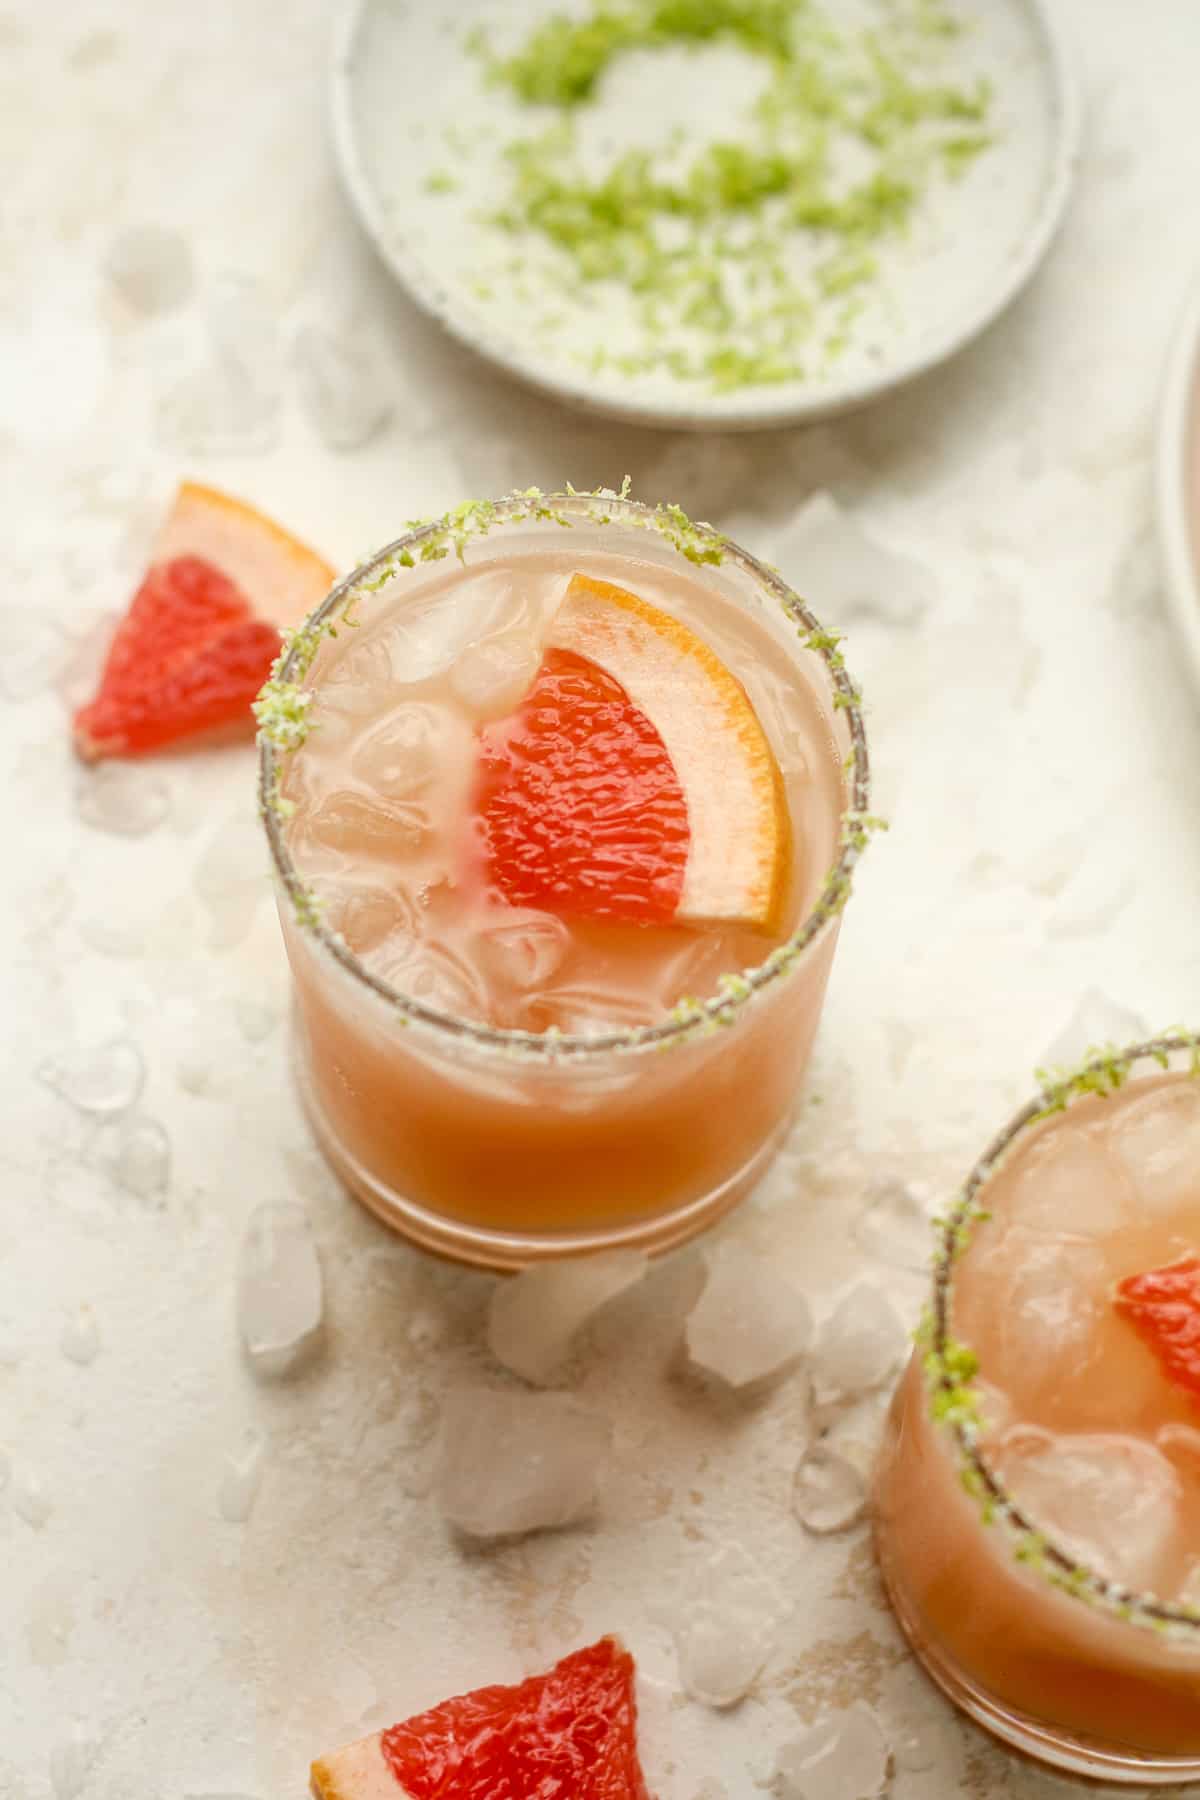 Overhead view of two glasses of grapefruit palomas.